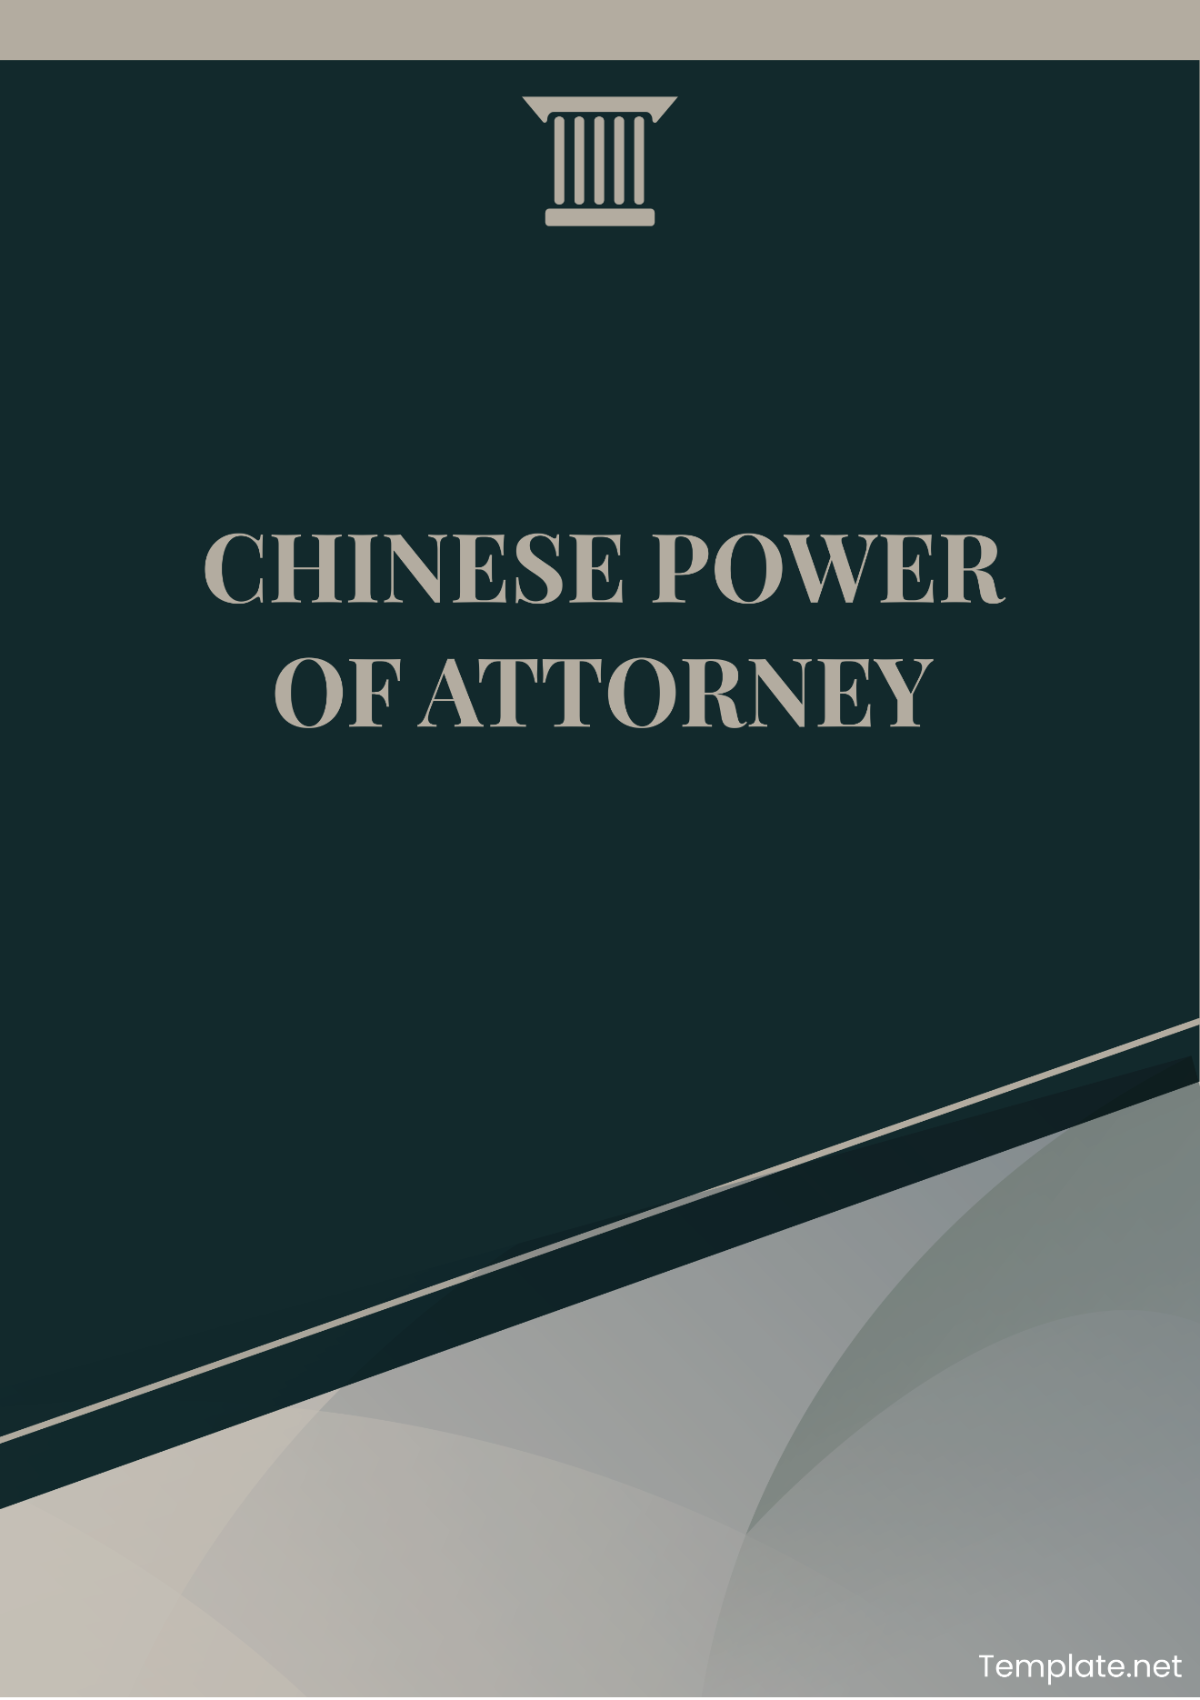 Chinese Power of Attorney Template